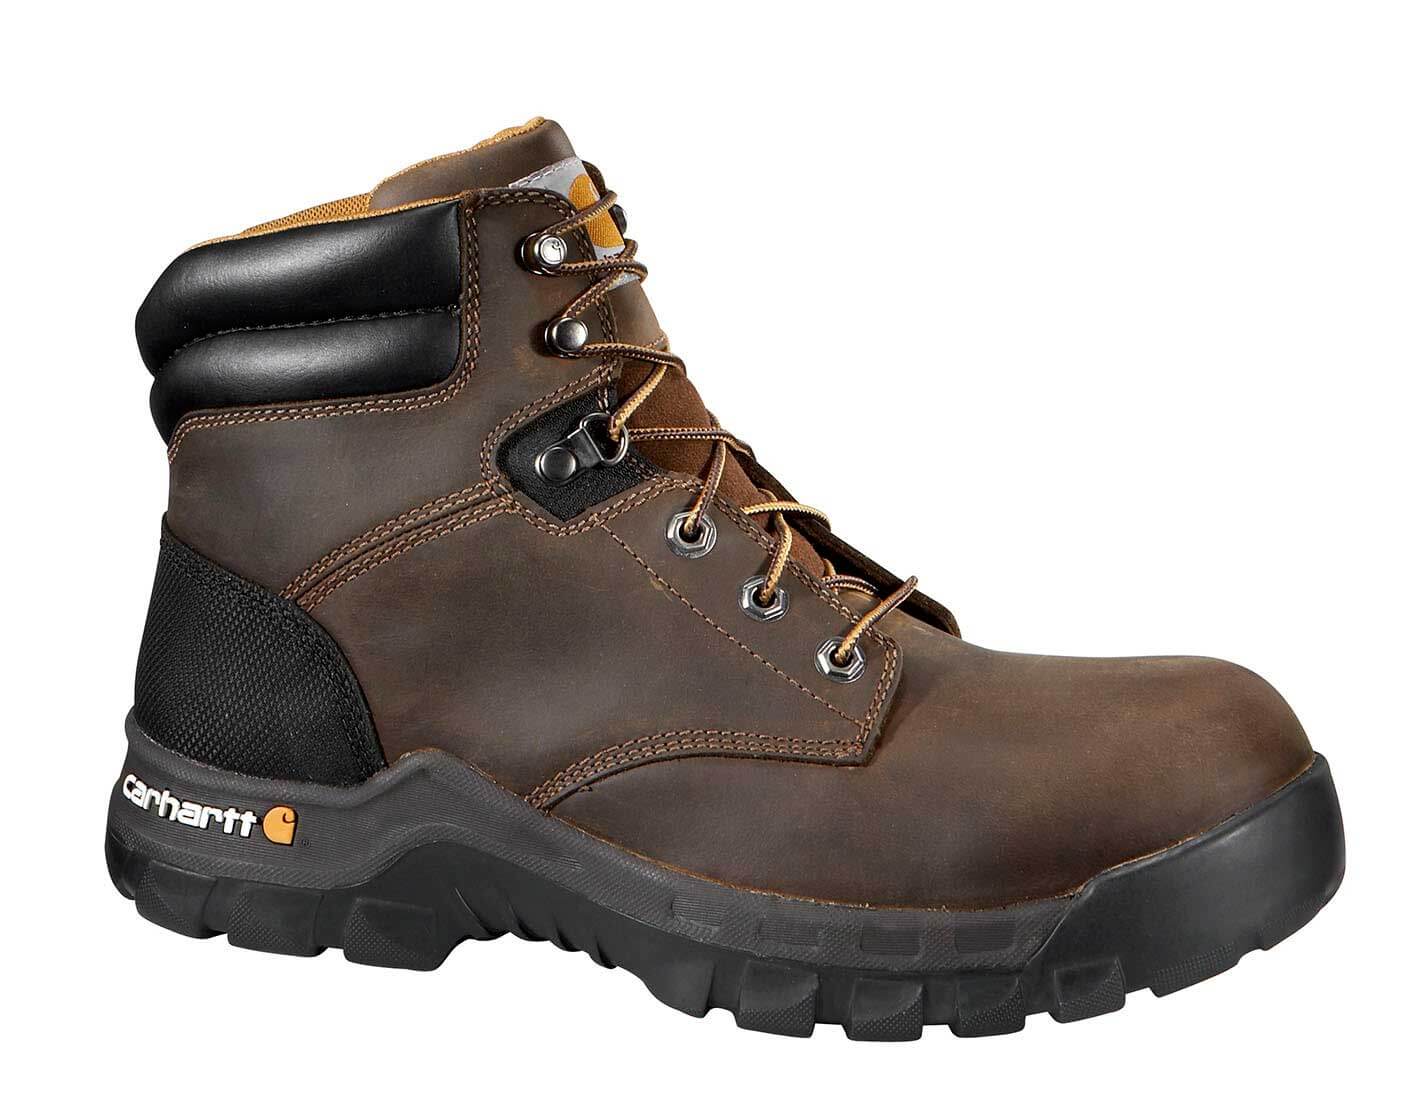 Carhartt - CMF6366 - Men's Rugged Flex Brown Leather NWP Composite Safety Toe 6 Lace-up Work Boot